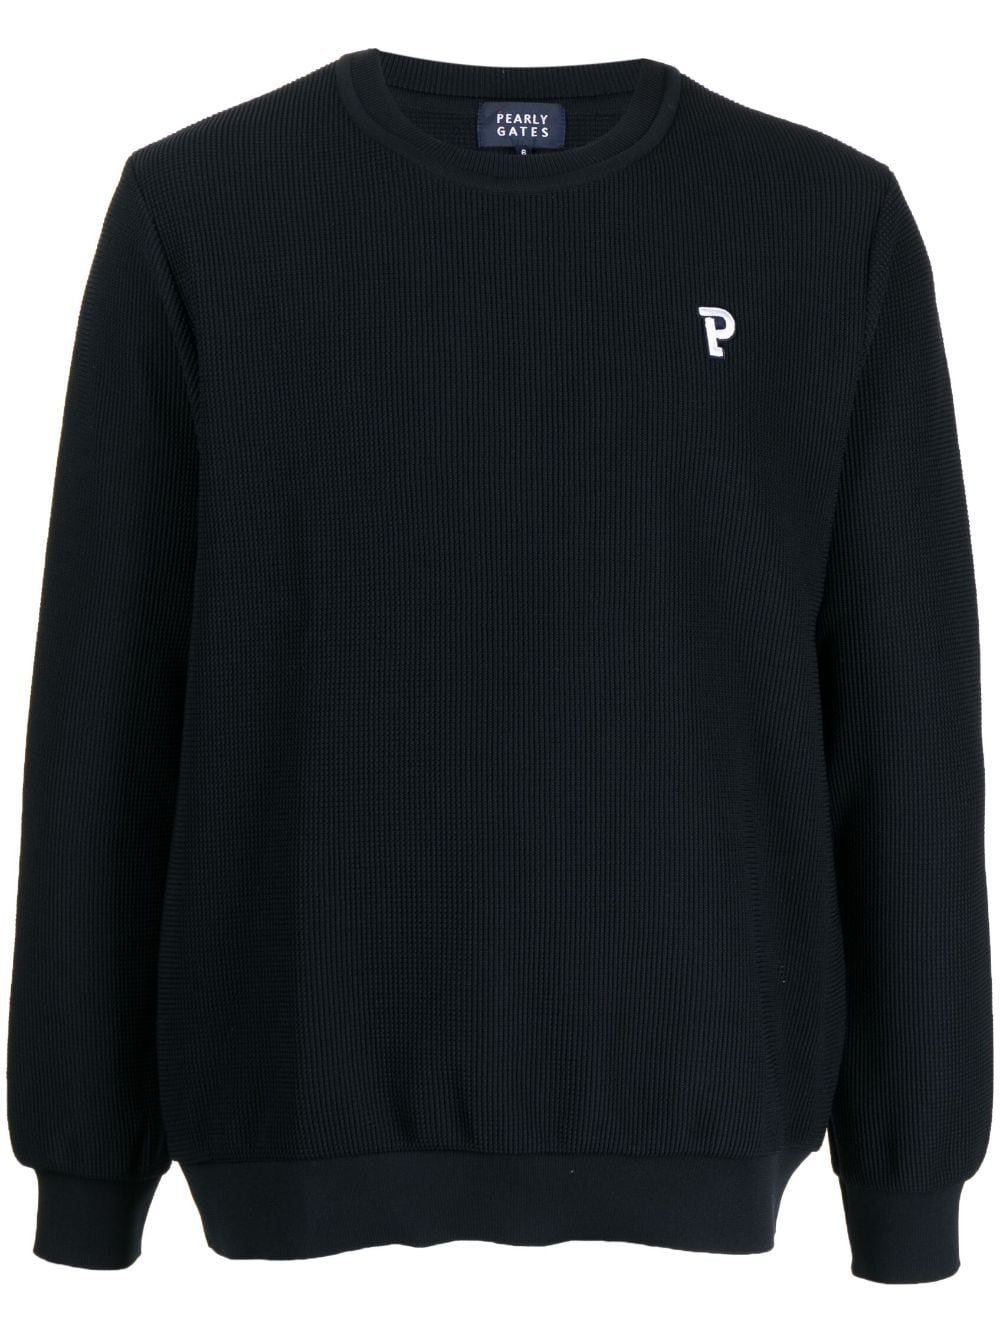 Pearly Gates Logo-patch Crew Neck Sweater In Black